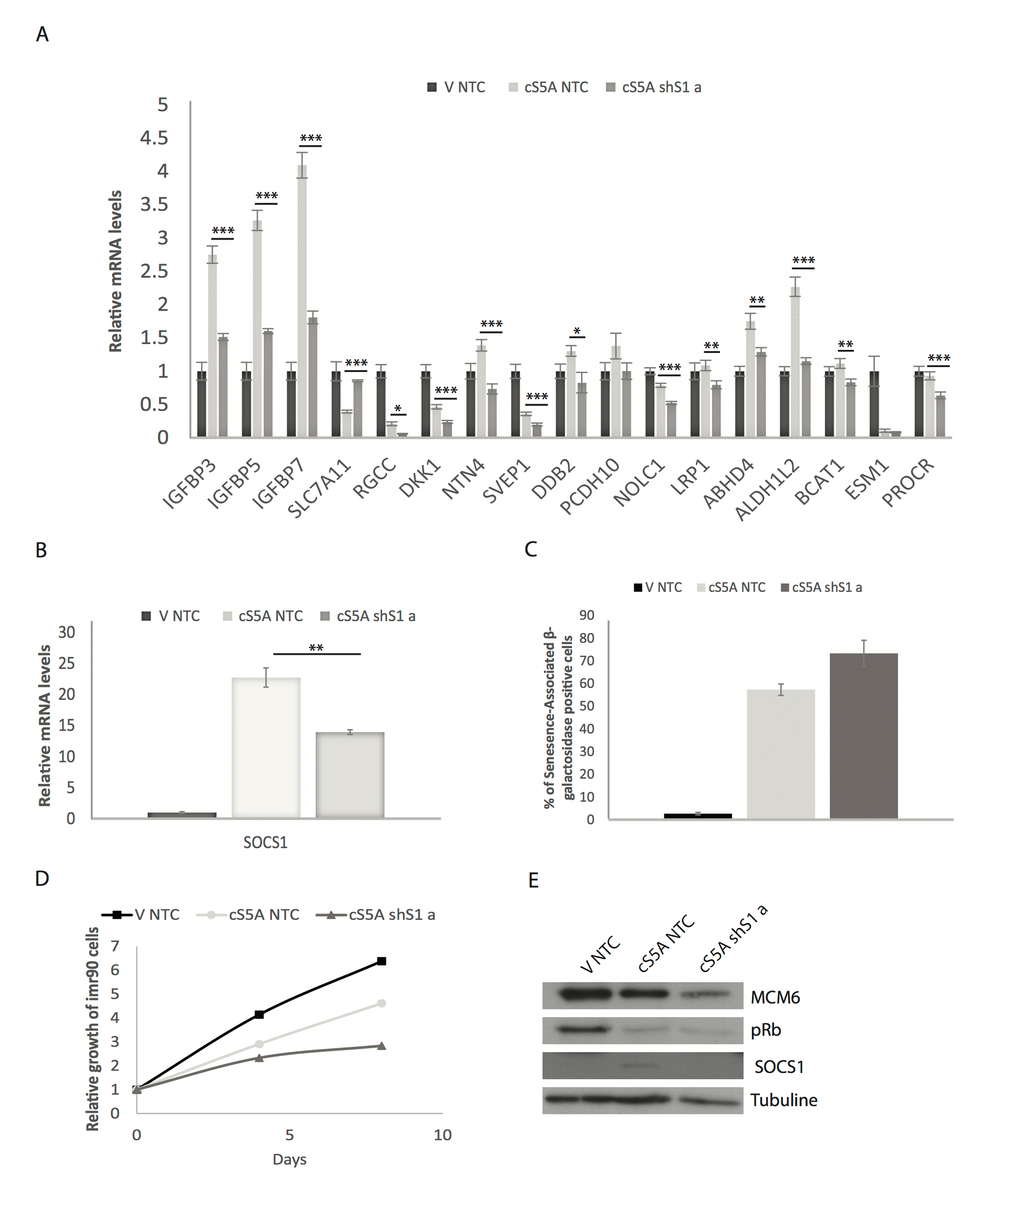 The regulation of p53 target genes by SOCS1 is not dependent on a disabled RB pathway. (A) QPCR validation of the p53 target genes identified by microarray analysis but in normal IMR90 fibroblasts expressing either an empty vector (V) or a constitutively activated STAT5A (cS5A) and with either a control shRNA (shNTC) or an shRNA against SOCS1 (shS1). Cells were collected 7 days after infection. (B) SOCS1 knockdown efficiency measured by qPCR in the conditions described in (A). (C) Status of the cells was assessed at the day of RNA collection (day 7 post infection) with a Senescence-Associated β-Galactosidase staining. Positively stained and unstained cells were counted under a light microscope in order to obtain the percentage of senescent cells. (D) Growth curves. Normal human fibroblasts (IMR90) were retrovirally infected with either an empty vector (V) or with constitutively activated STAT5A (cS5A) and with either a control shRNA (shNTC) or a shRNA against SOCS1 (shS1 a). Cells were counted and plated for the growth assay. (E) Western blots of senescence markers (MCM6, pRb and SOCS1) of cells as in (A). Tubulin was used as a loading control. All experiments were performed three times, error bars indicate the standard errors of triplicates, * = p